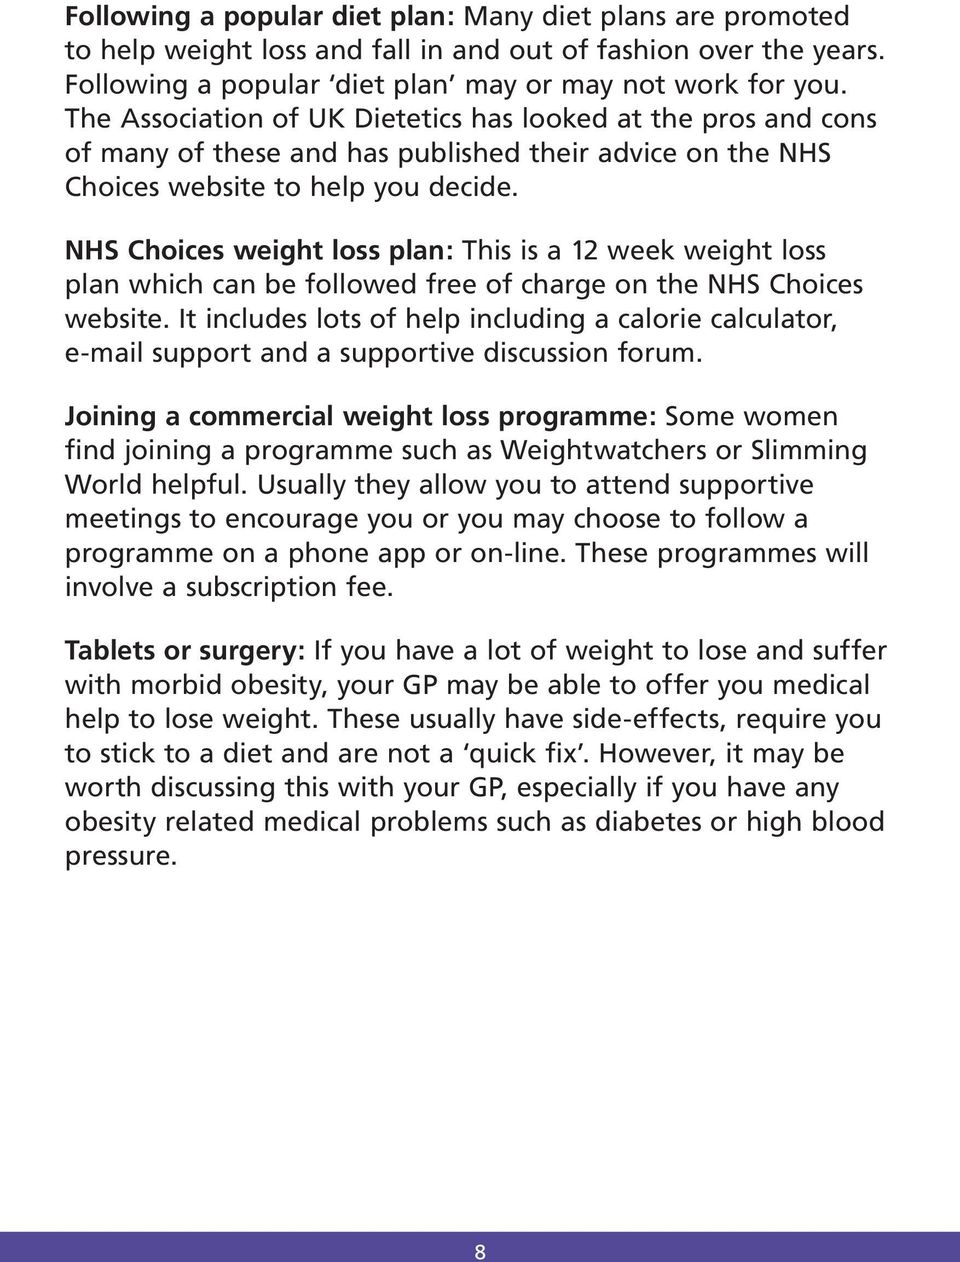 NHS Choices weight loss plan: This is a 12 week weight loss plan which can be followed free of charge on the NHS Choices website.